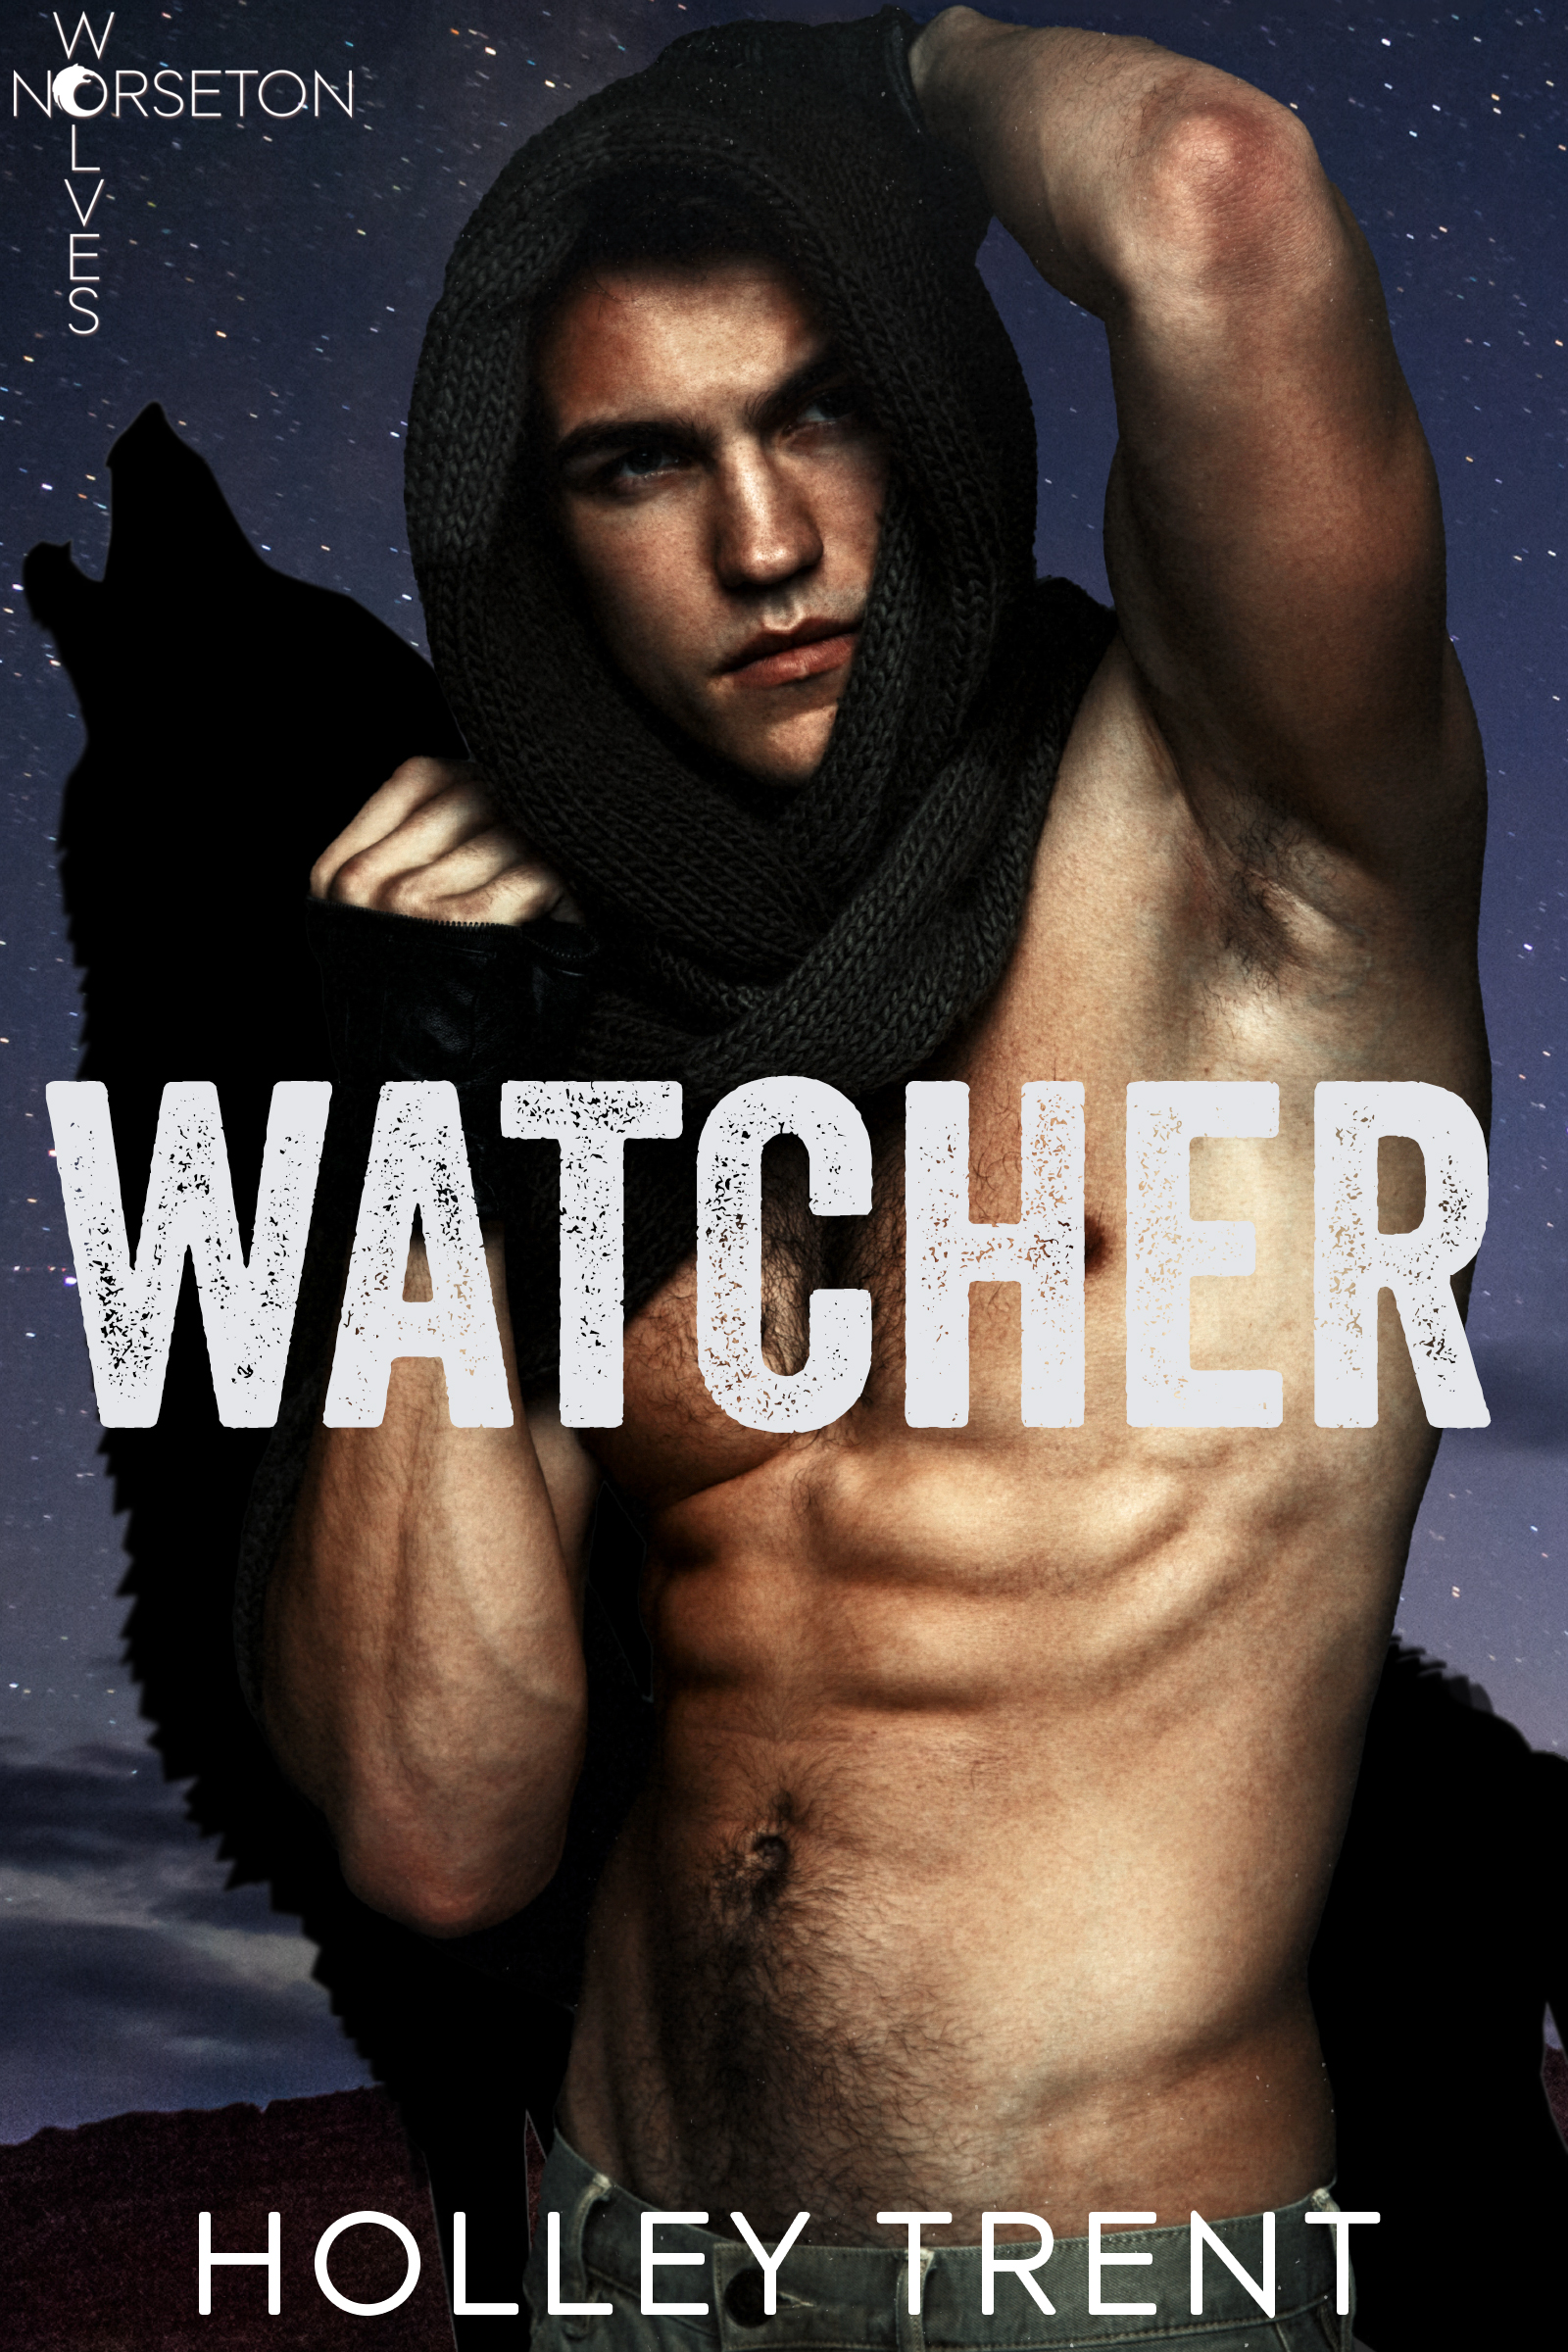 Cover for Norseton Wolves Book 10 Watcher by Holley Trent has a shirtless man draping cloth around his head. A silhouetted wolf is in the background in front of a dark desert horizon.